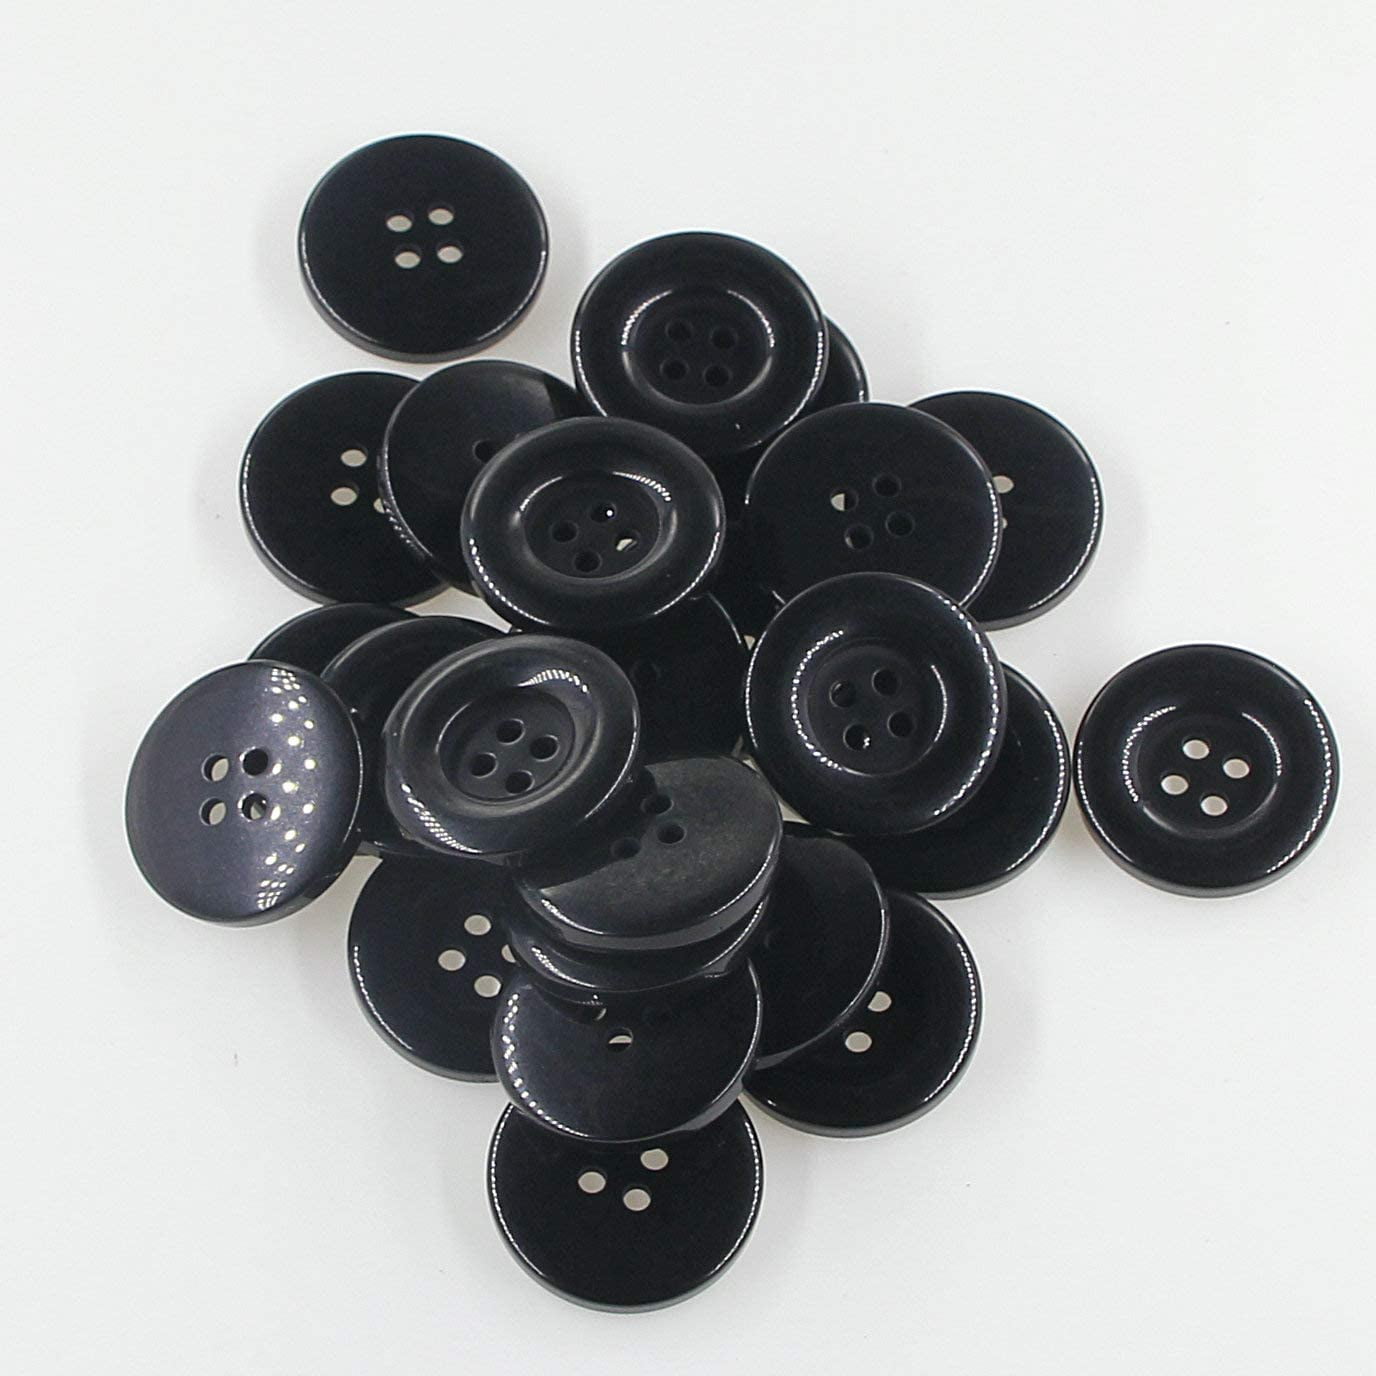 15mm-25mm 50Pcs Round Resin Buttons 4-Holes Sewing Scrapbooking DIY Craft Making 